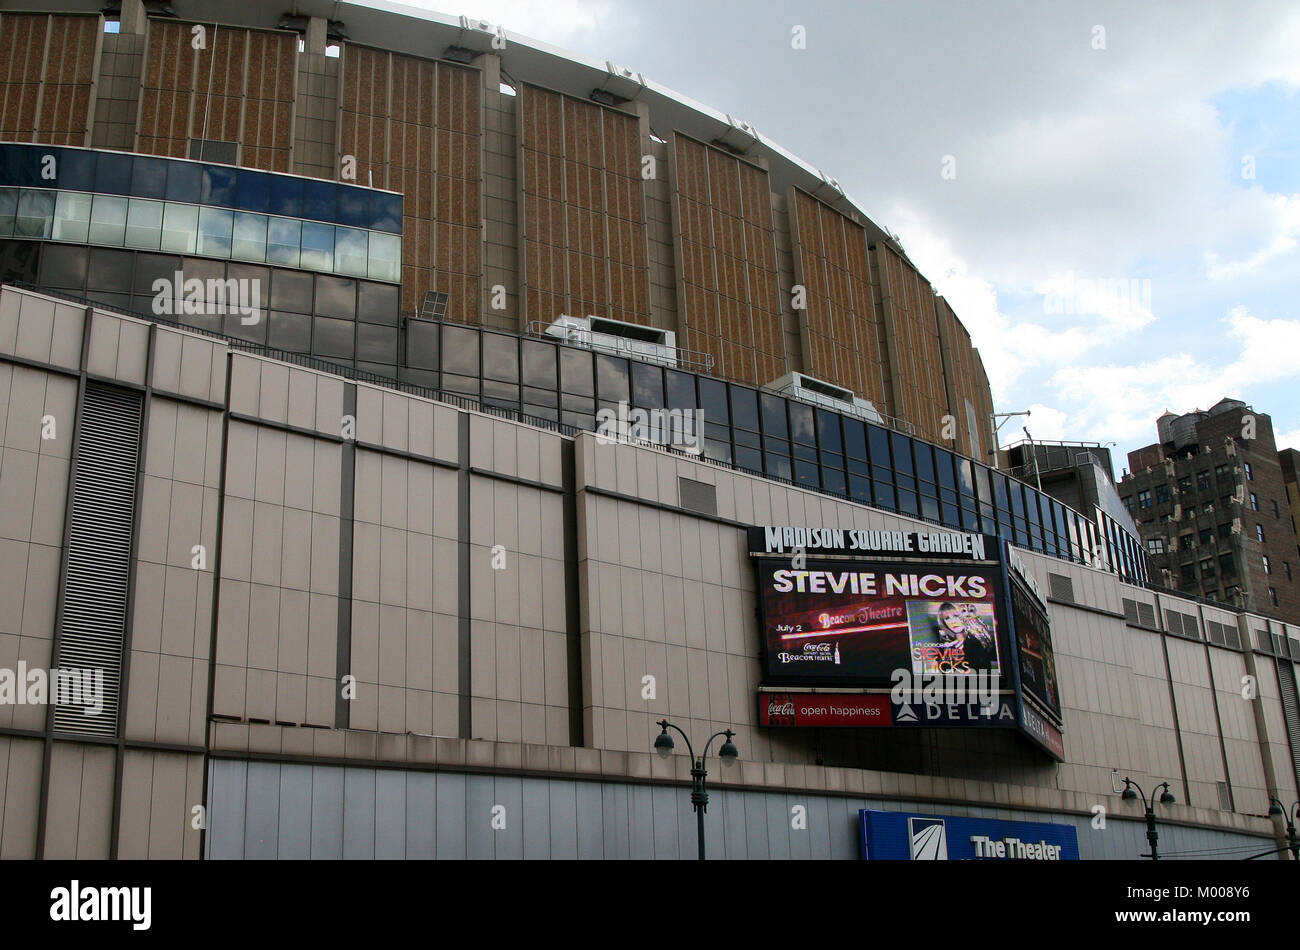 Madison Square Garden (MSG) with a billboard advertising Stevie Nicks's live performance on July 2nd 2012 in the Beacon Theatre, 4 Pennsylvania Plaza, Stock Photo